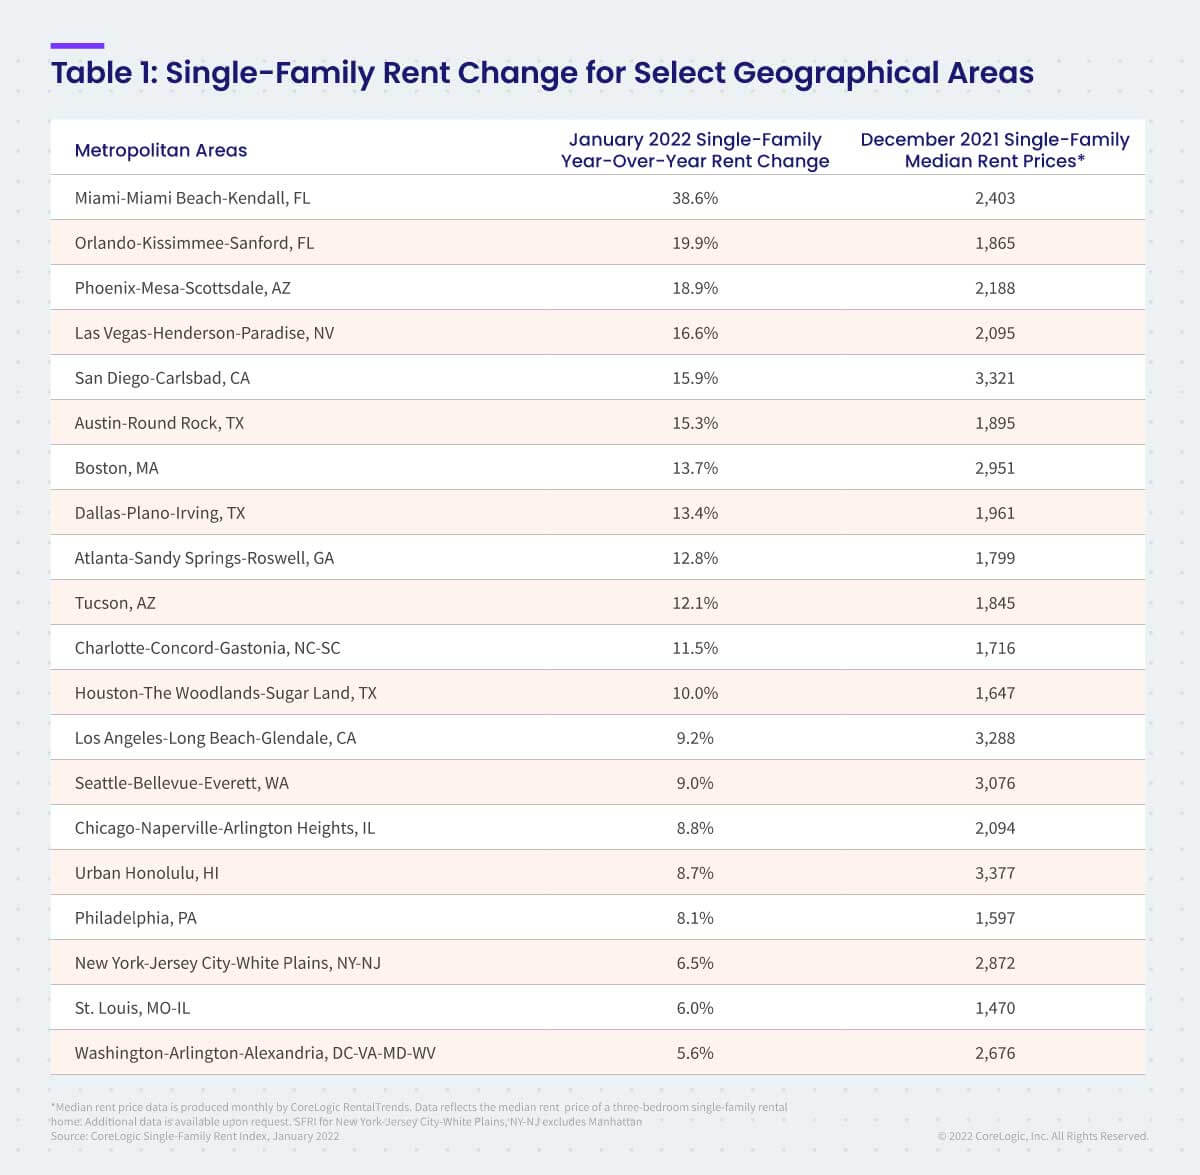 Table 1: Single-Family Rent Change for Select Geographical Areas